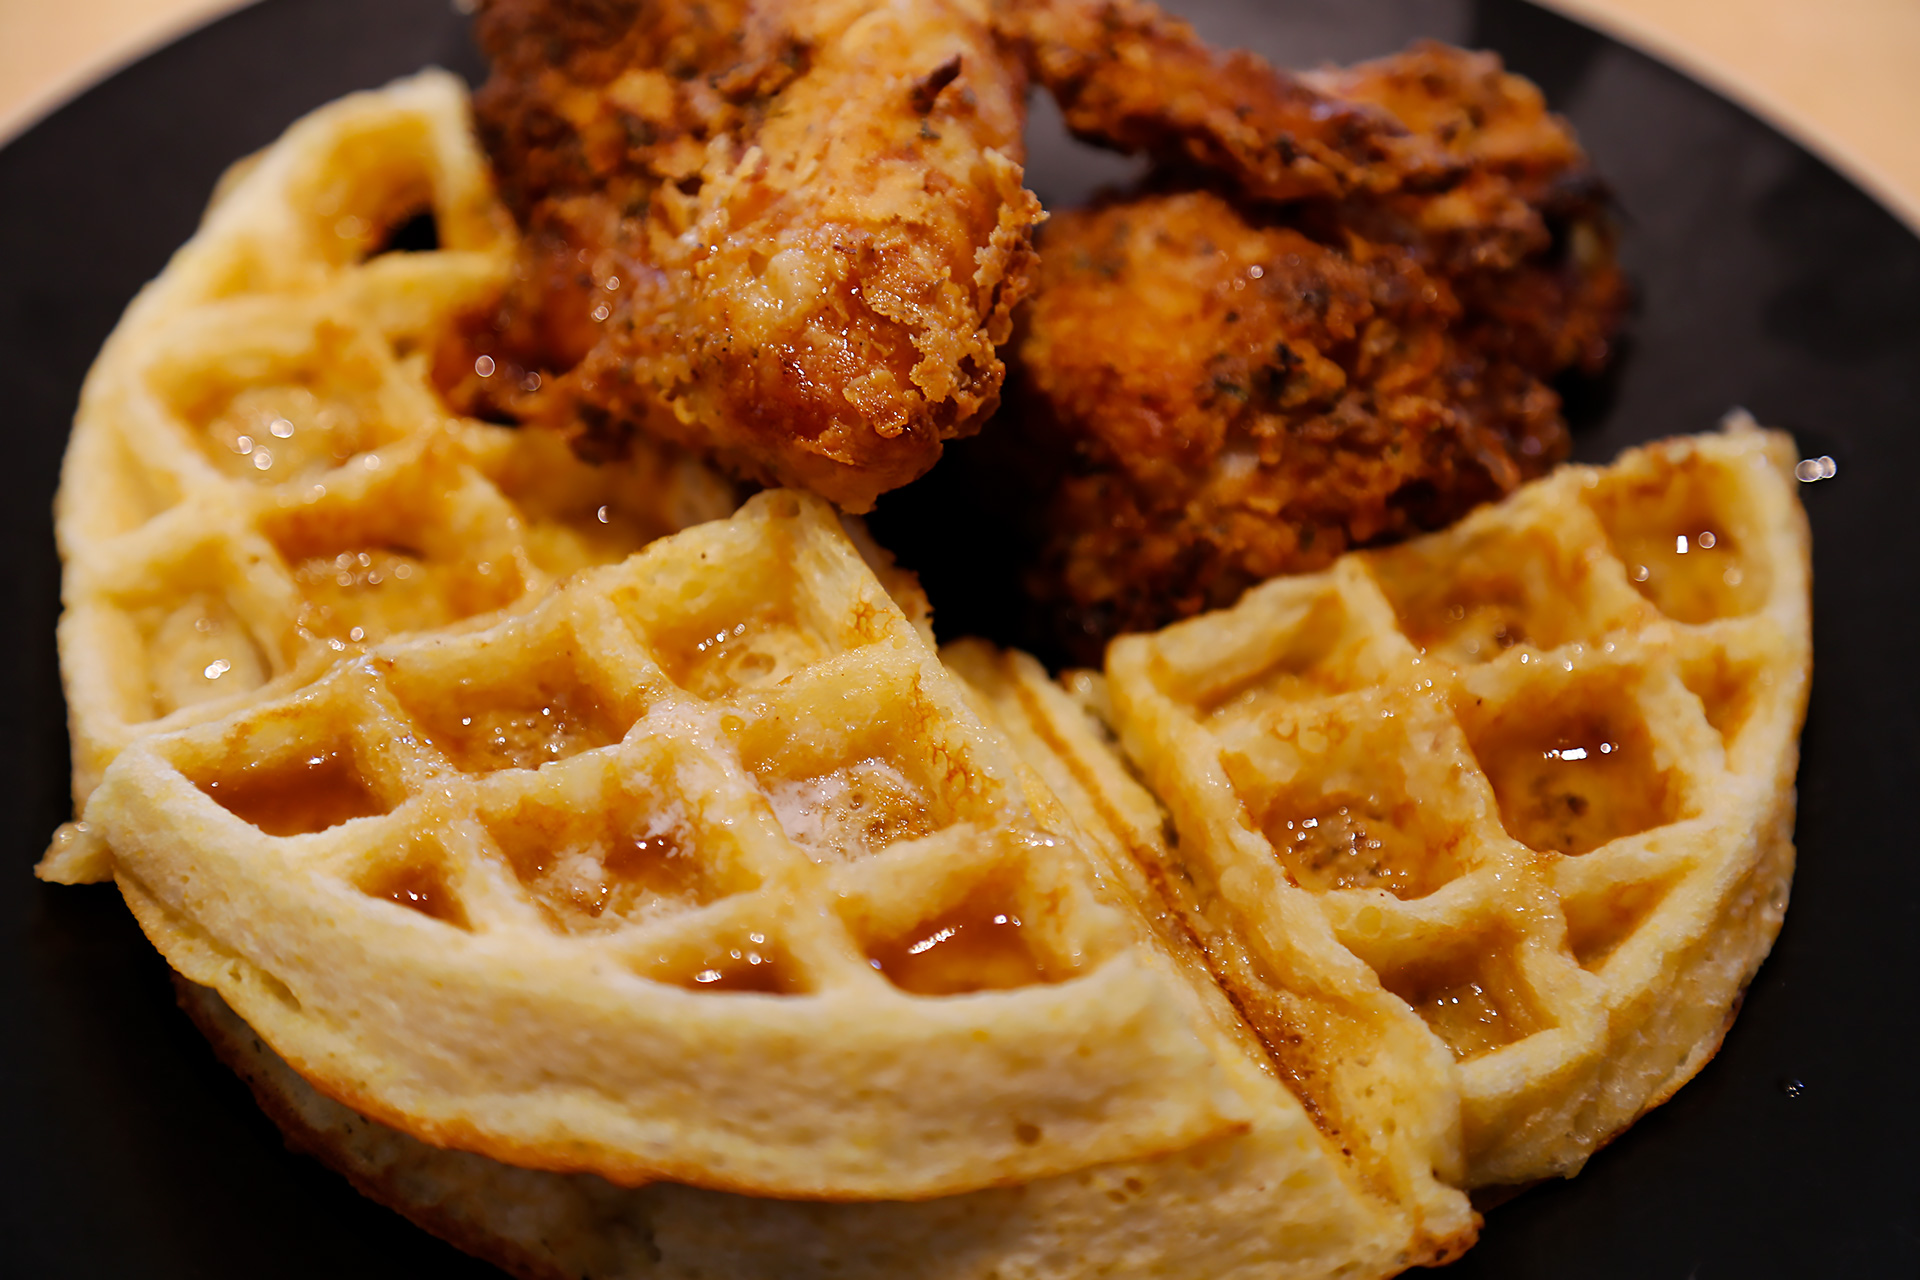 Serve cornmeal waffles with apple cider syrup and buttermilk fried chicken